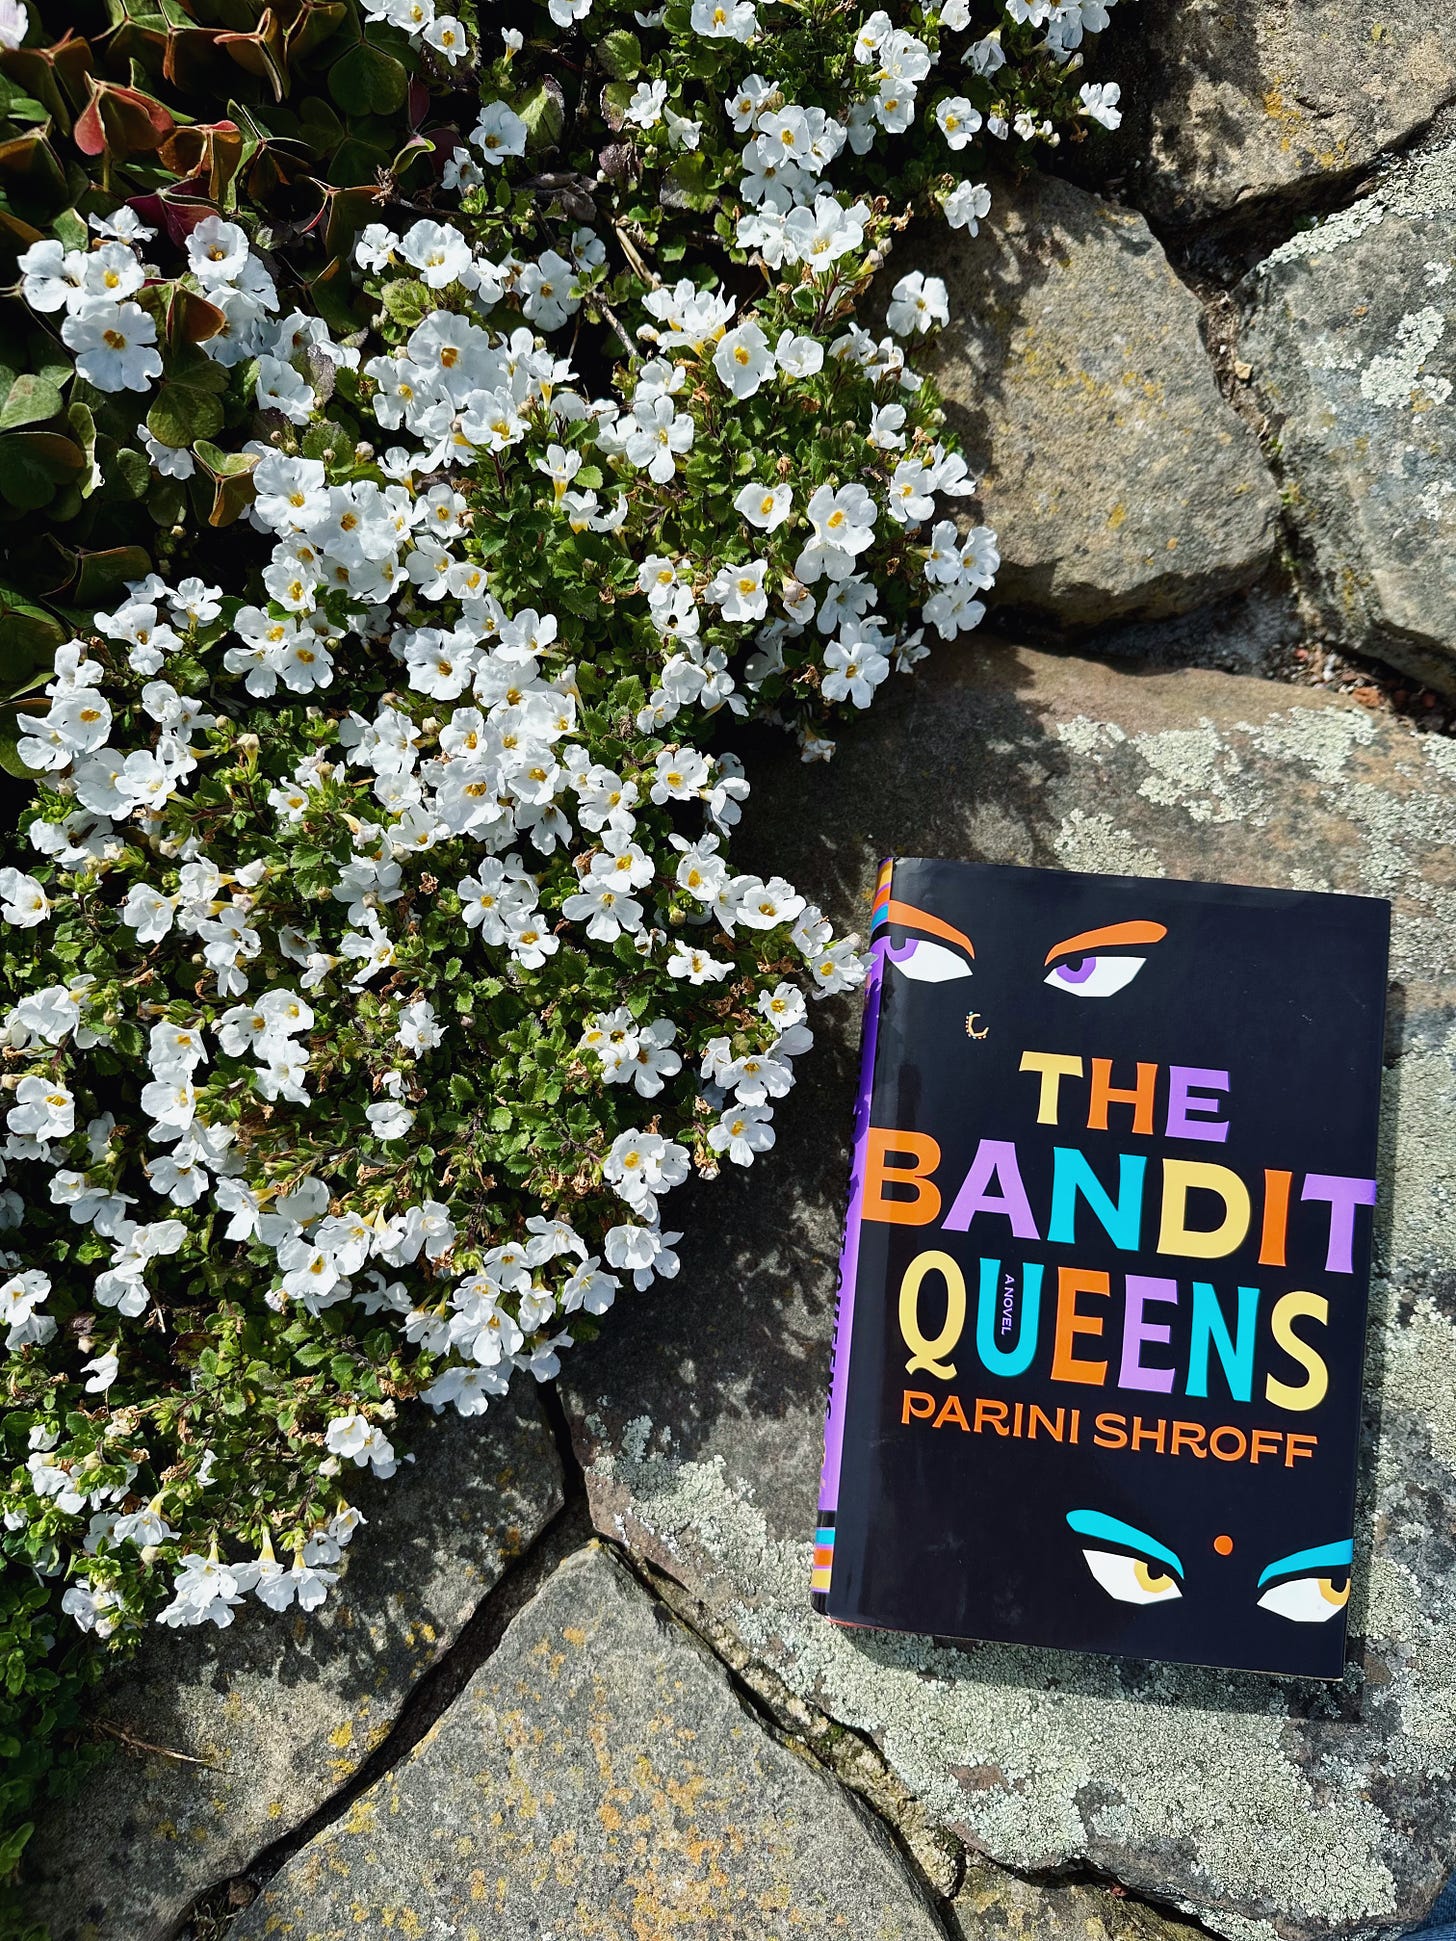 The Bandit Queens on a stone ledge next to white flowers